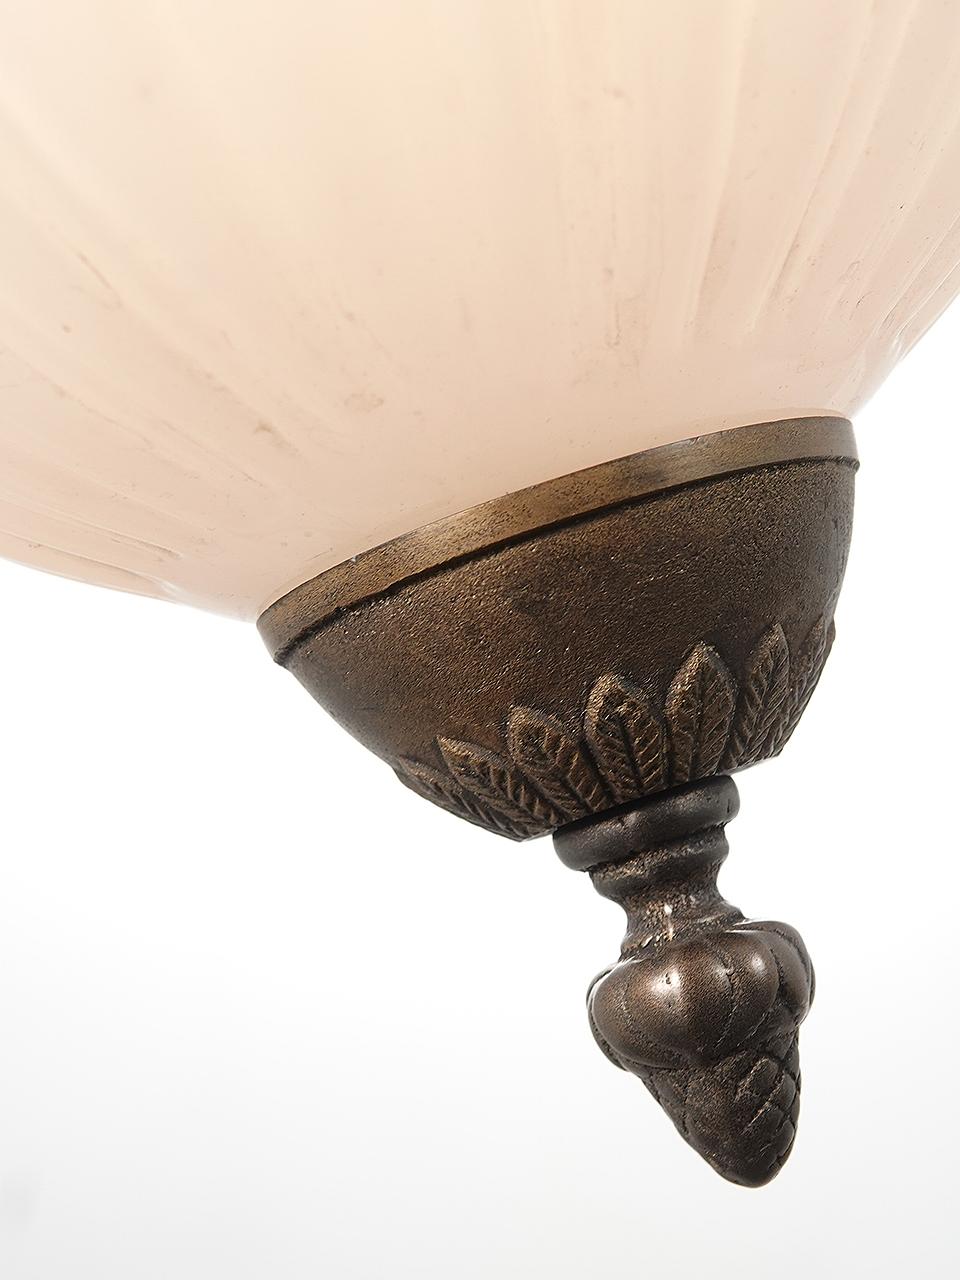 Large Decorative Humphrey Gas lamp In Good Condition For Sale In Peekskill, NY